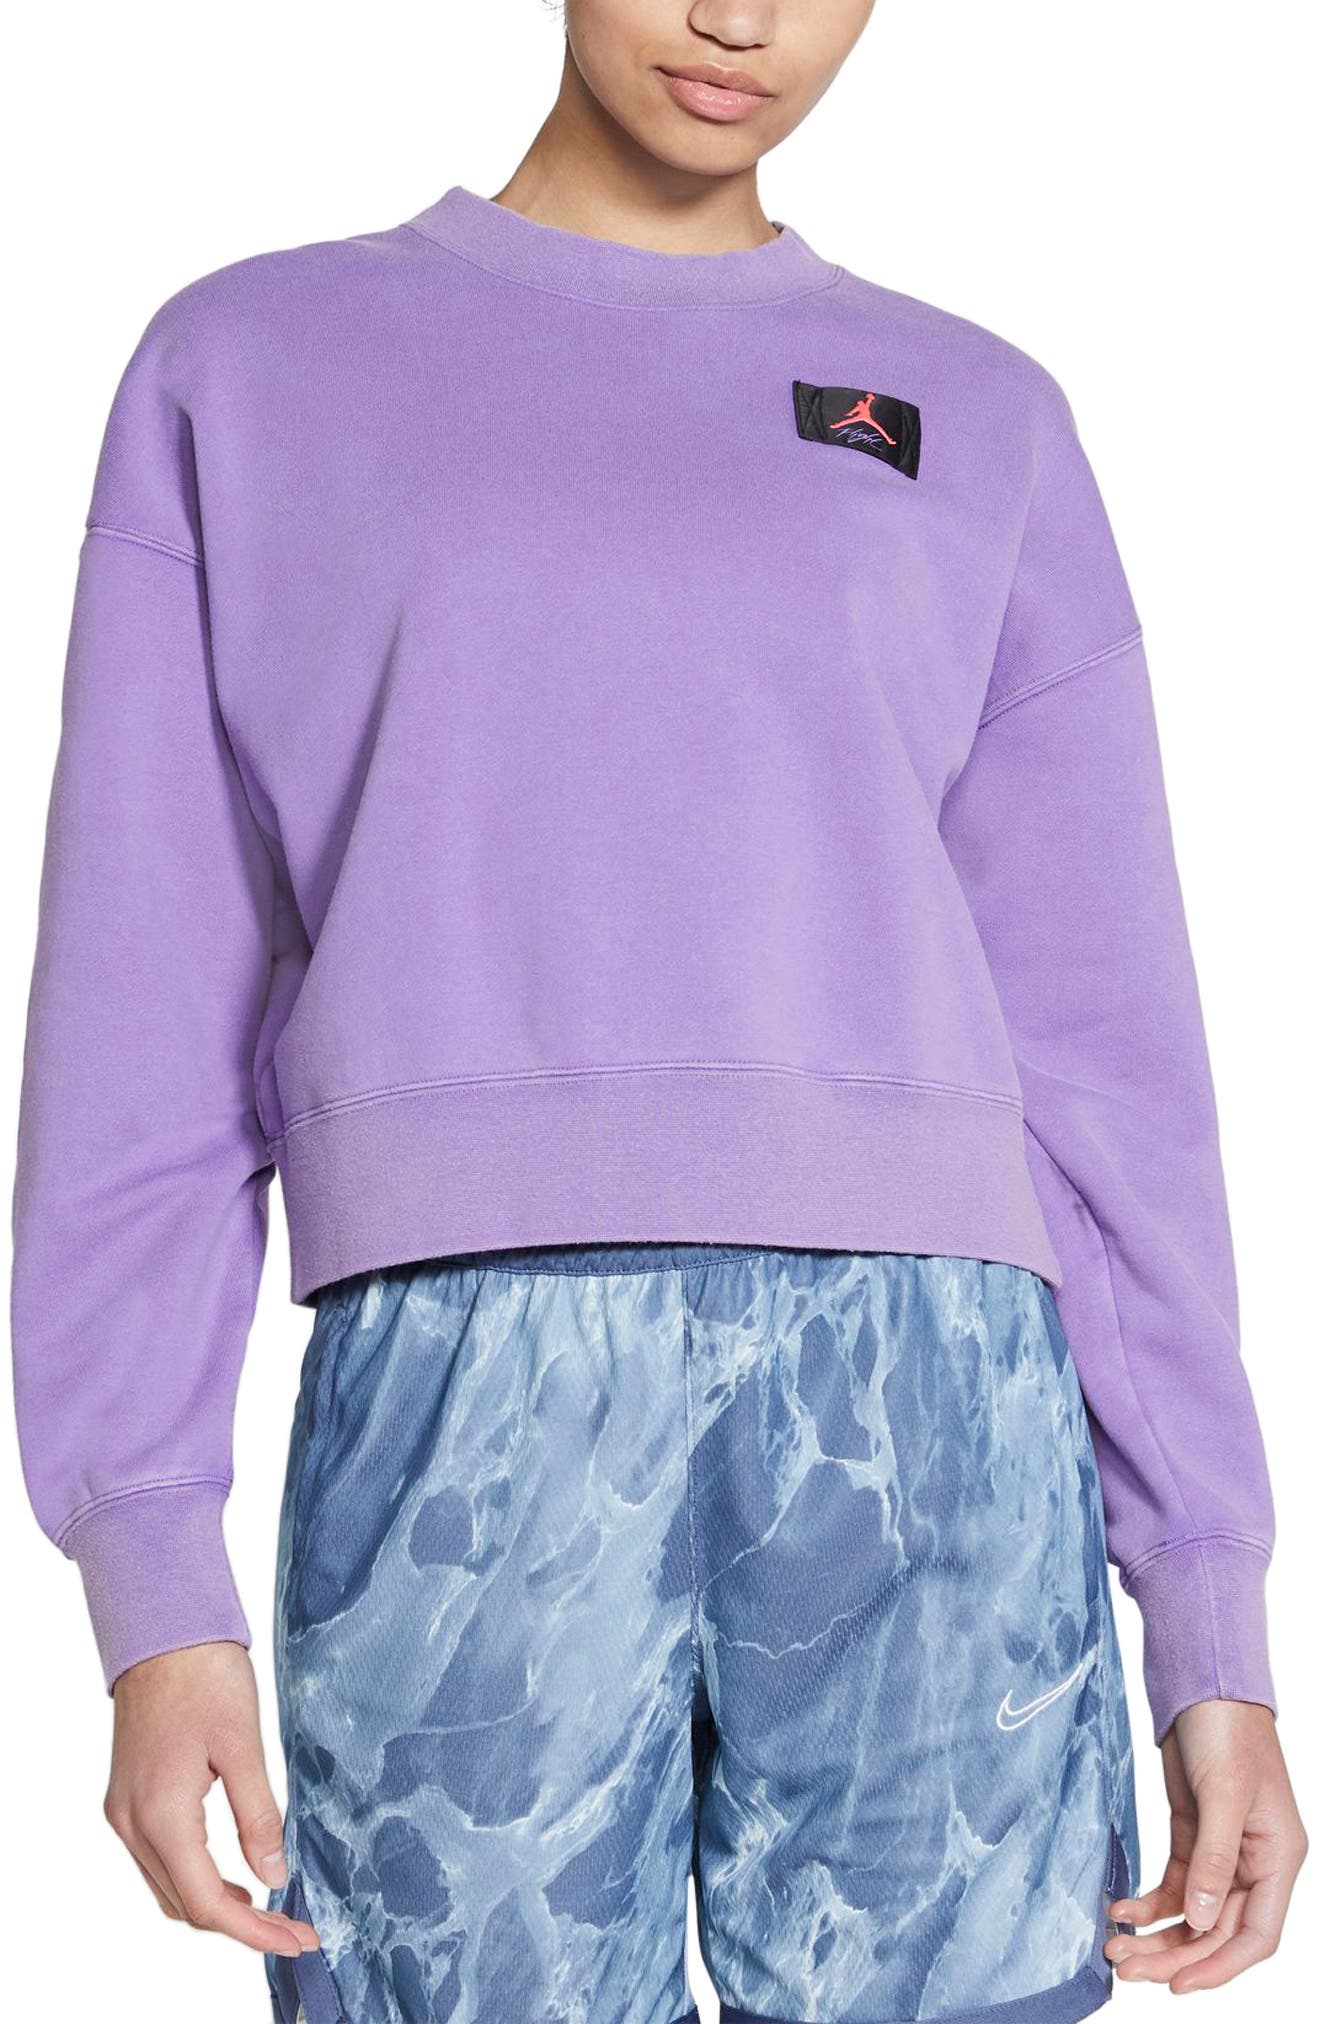 purple nike shorts outfit